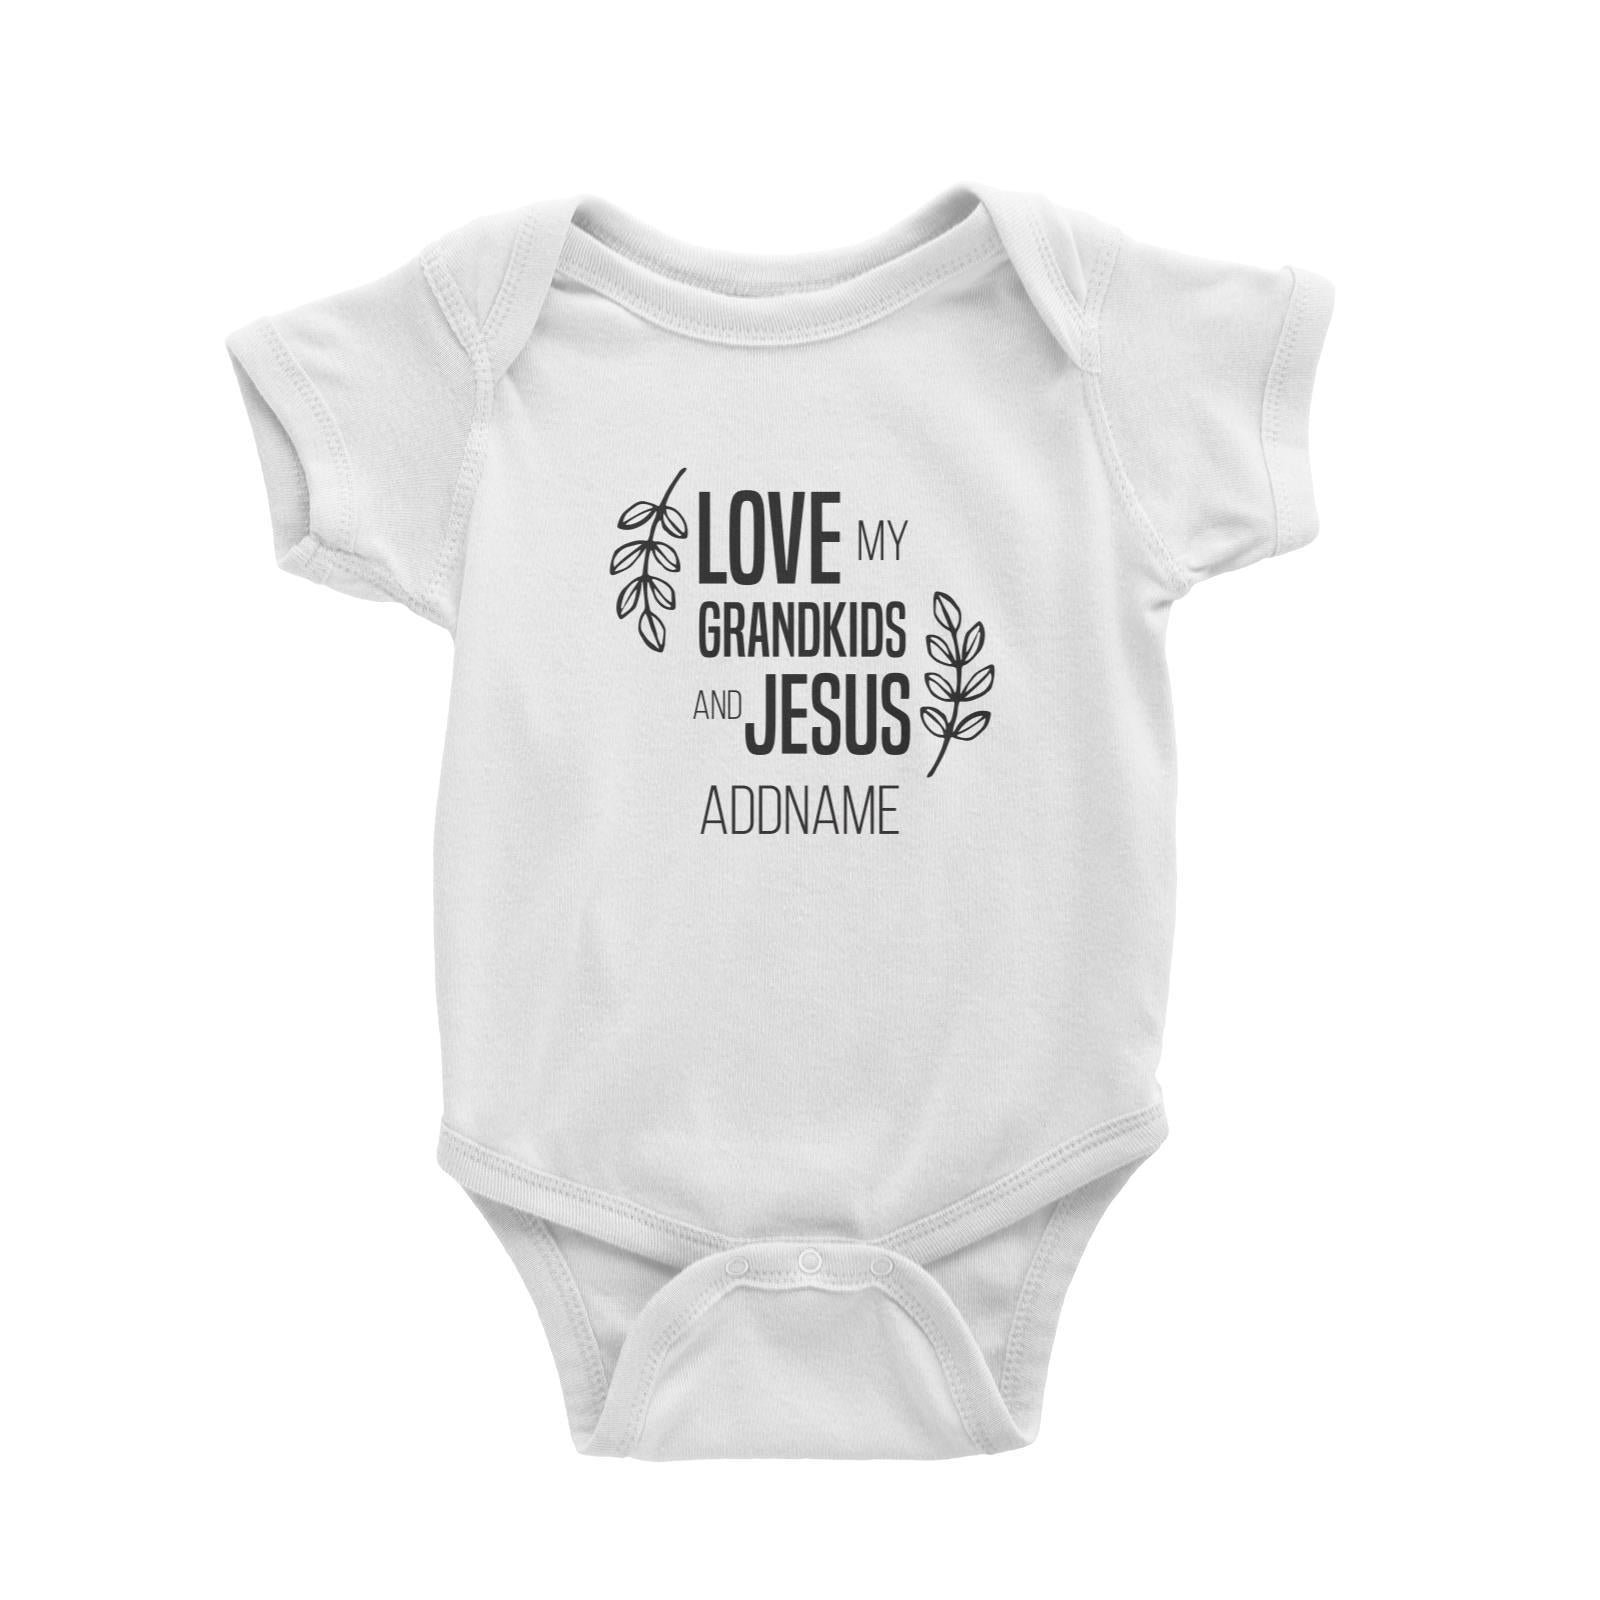 Christian Series Love My Grandkids And Jesus Addname Baby Romper